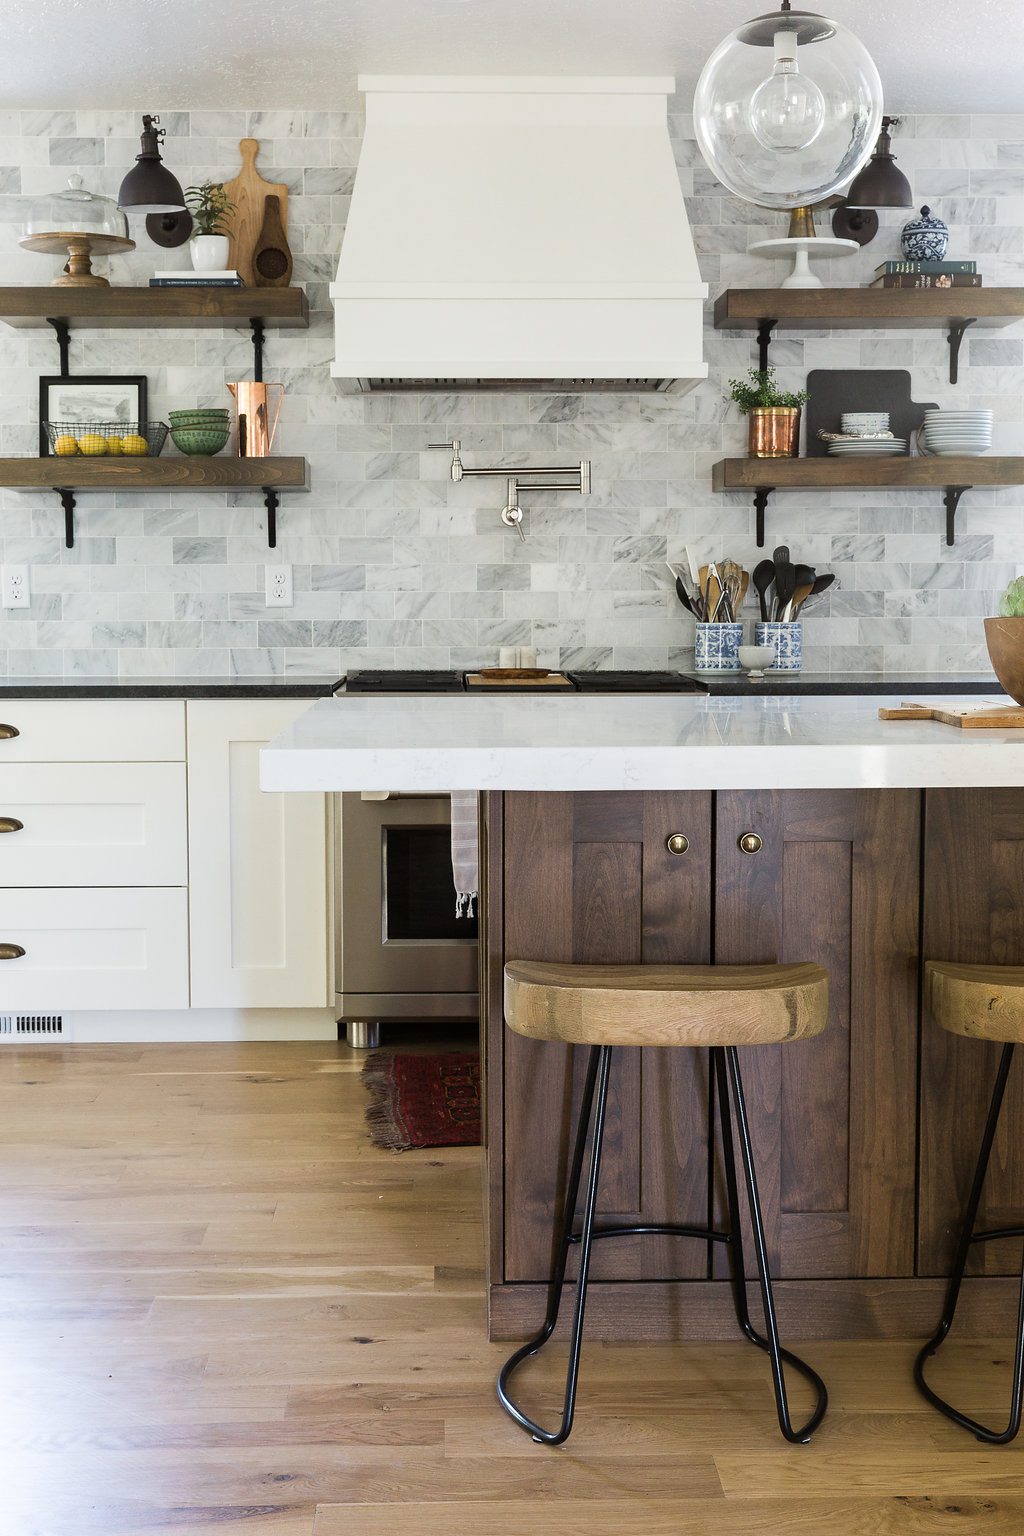 Alpine Modern Remodel: Kitchen, Dining, and Mudroom - House of Jade ...